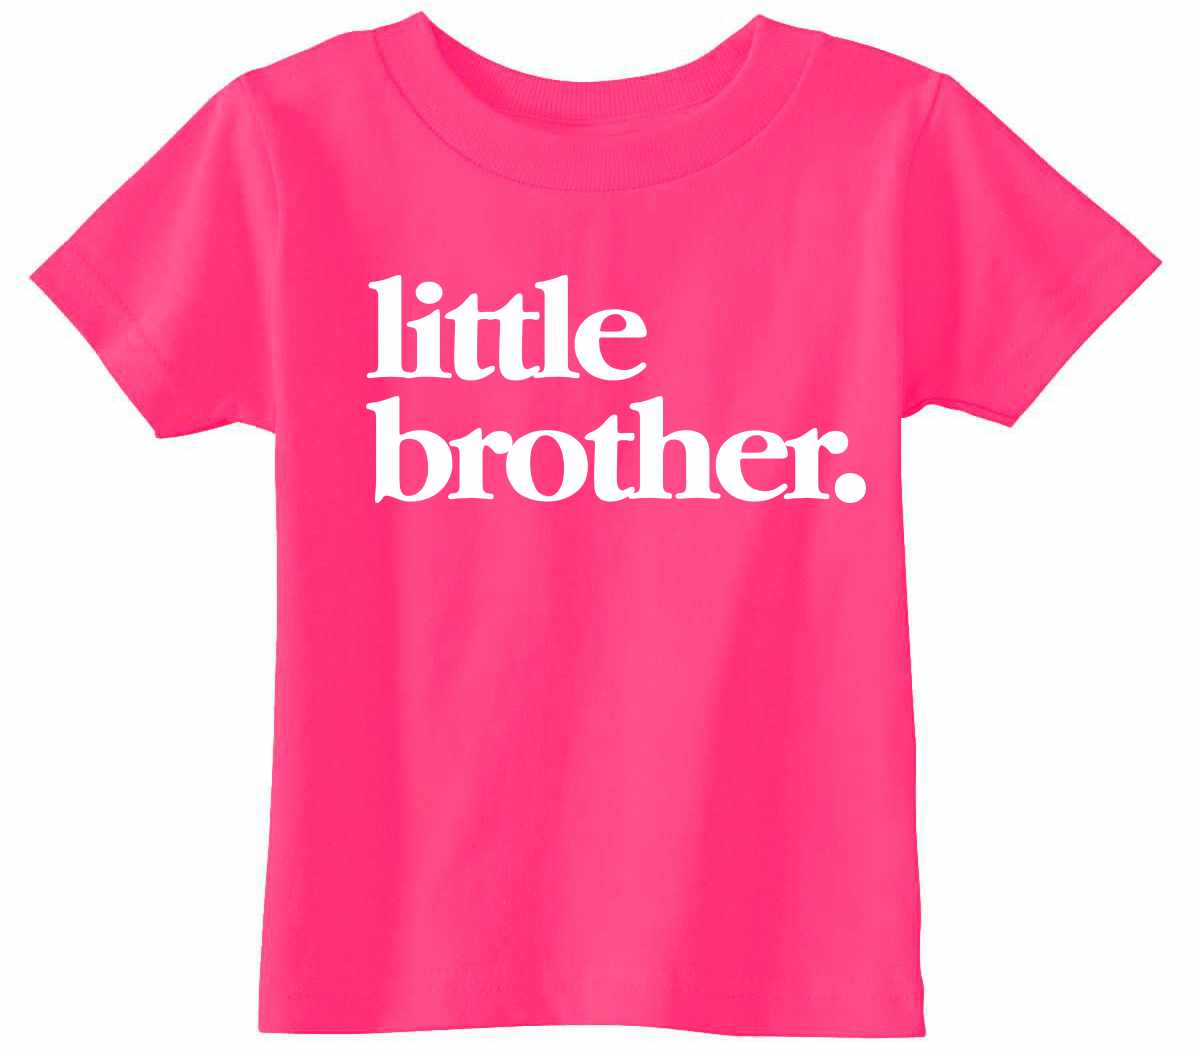 Little Brother on Infant-Toddler T-Shirt (#1322-7)